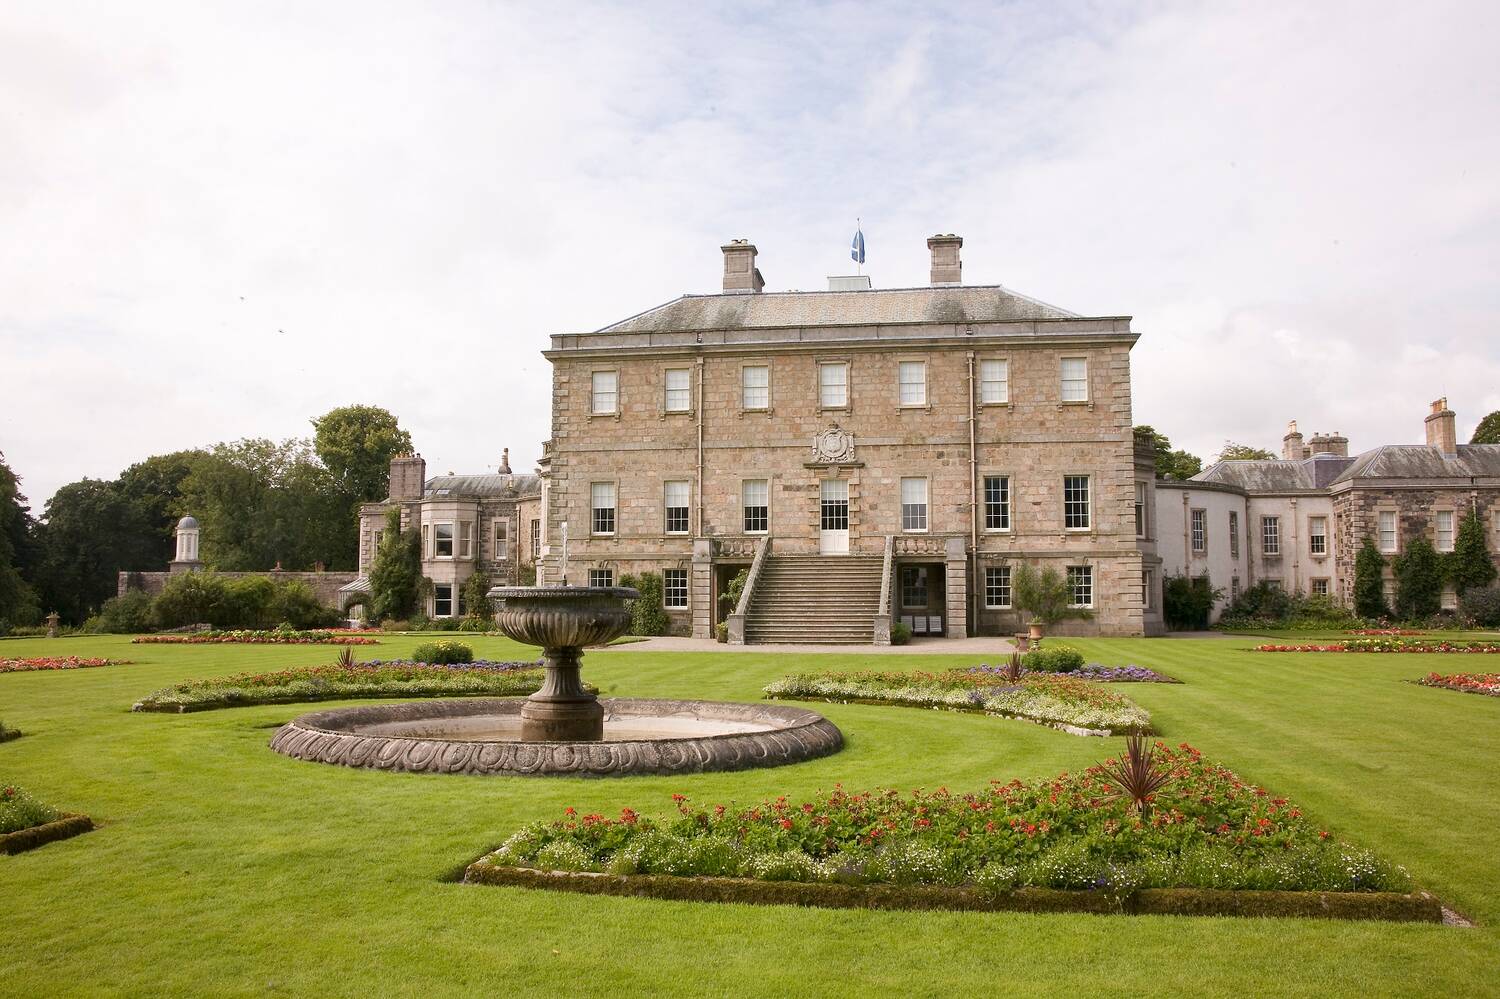 A view of a large Georgian country house with immaculate lawns in front. At the centre of the lawns and flowerbeds is a circular fountain, gently trickling.